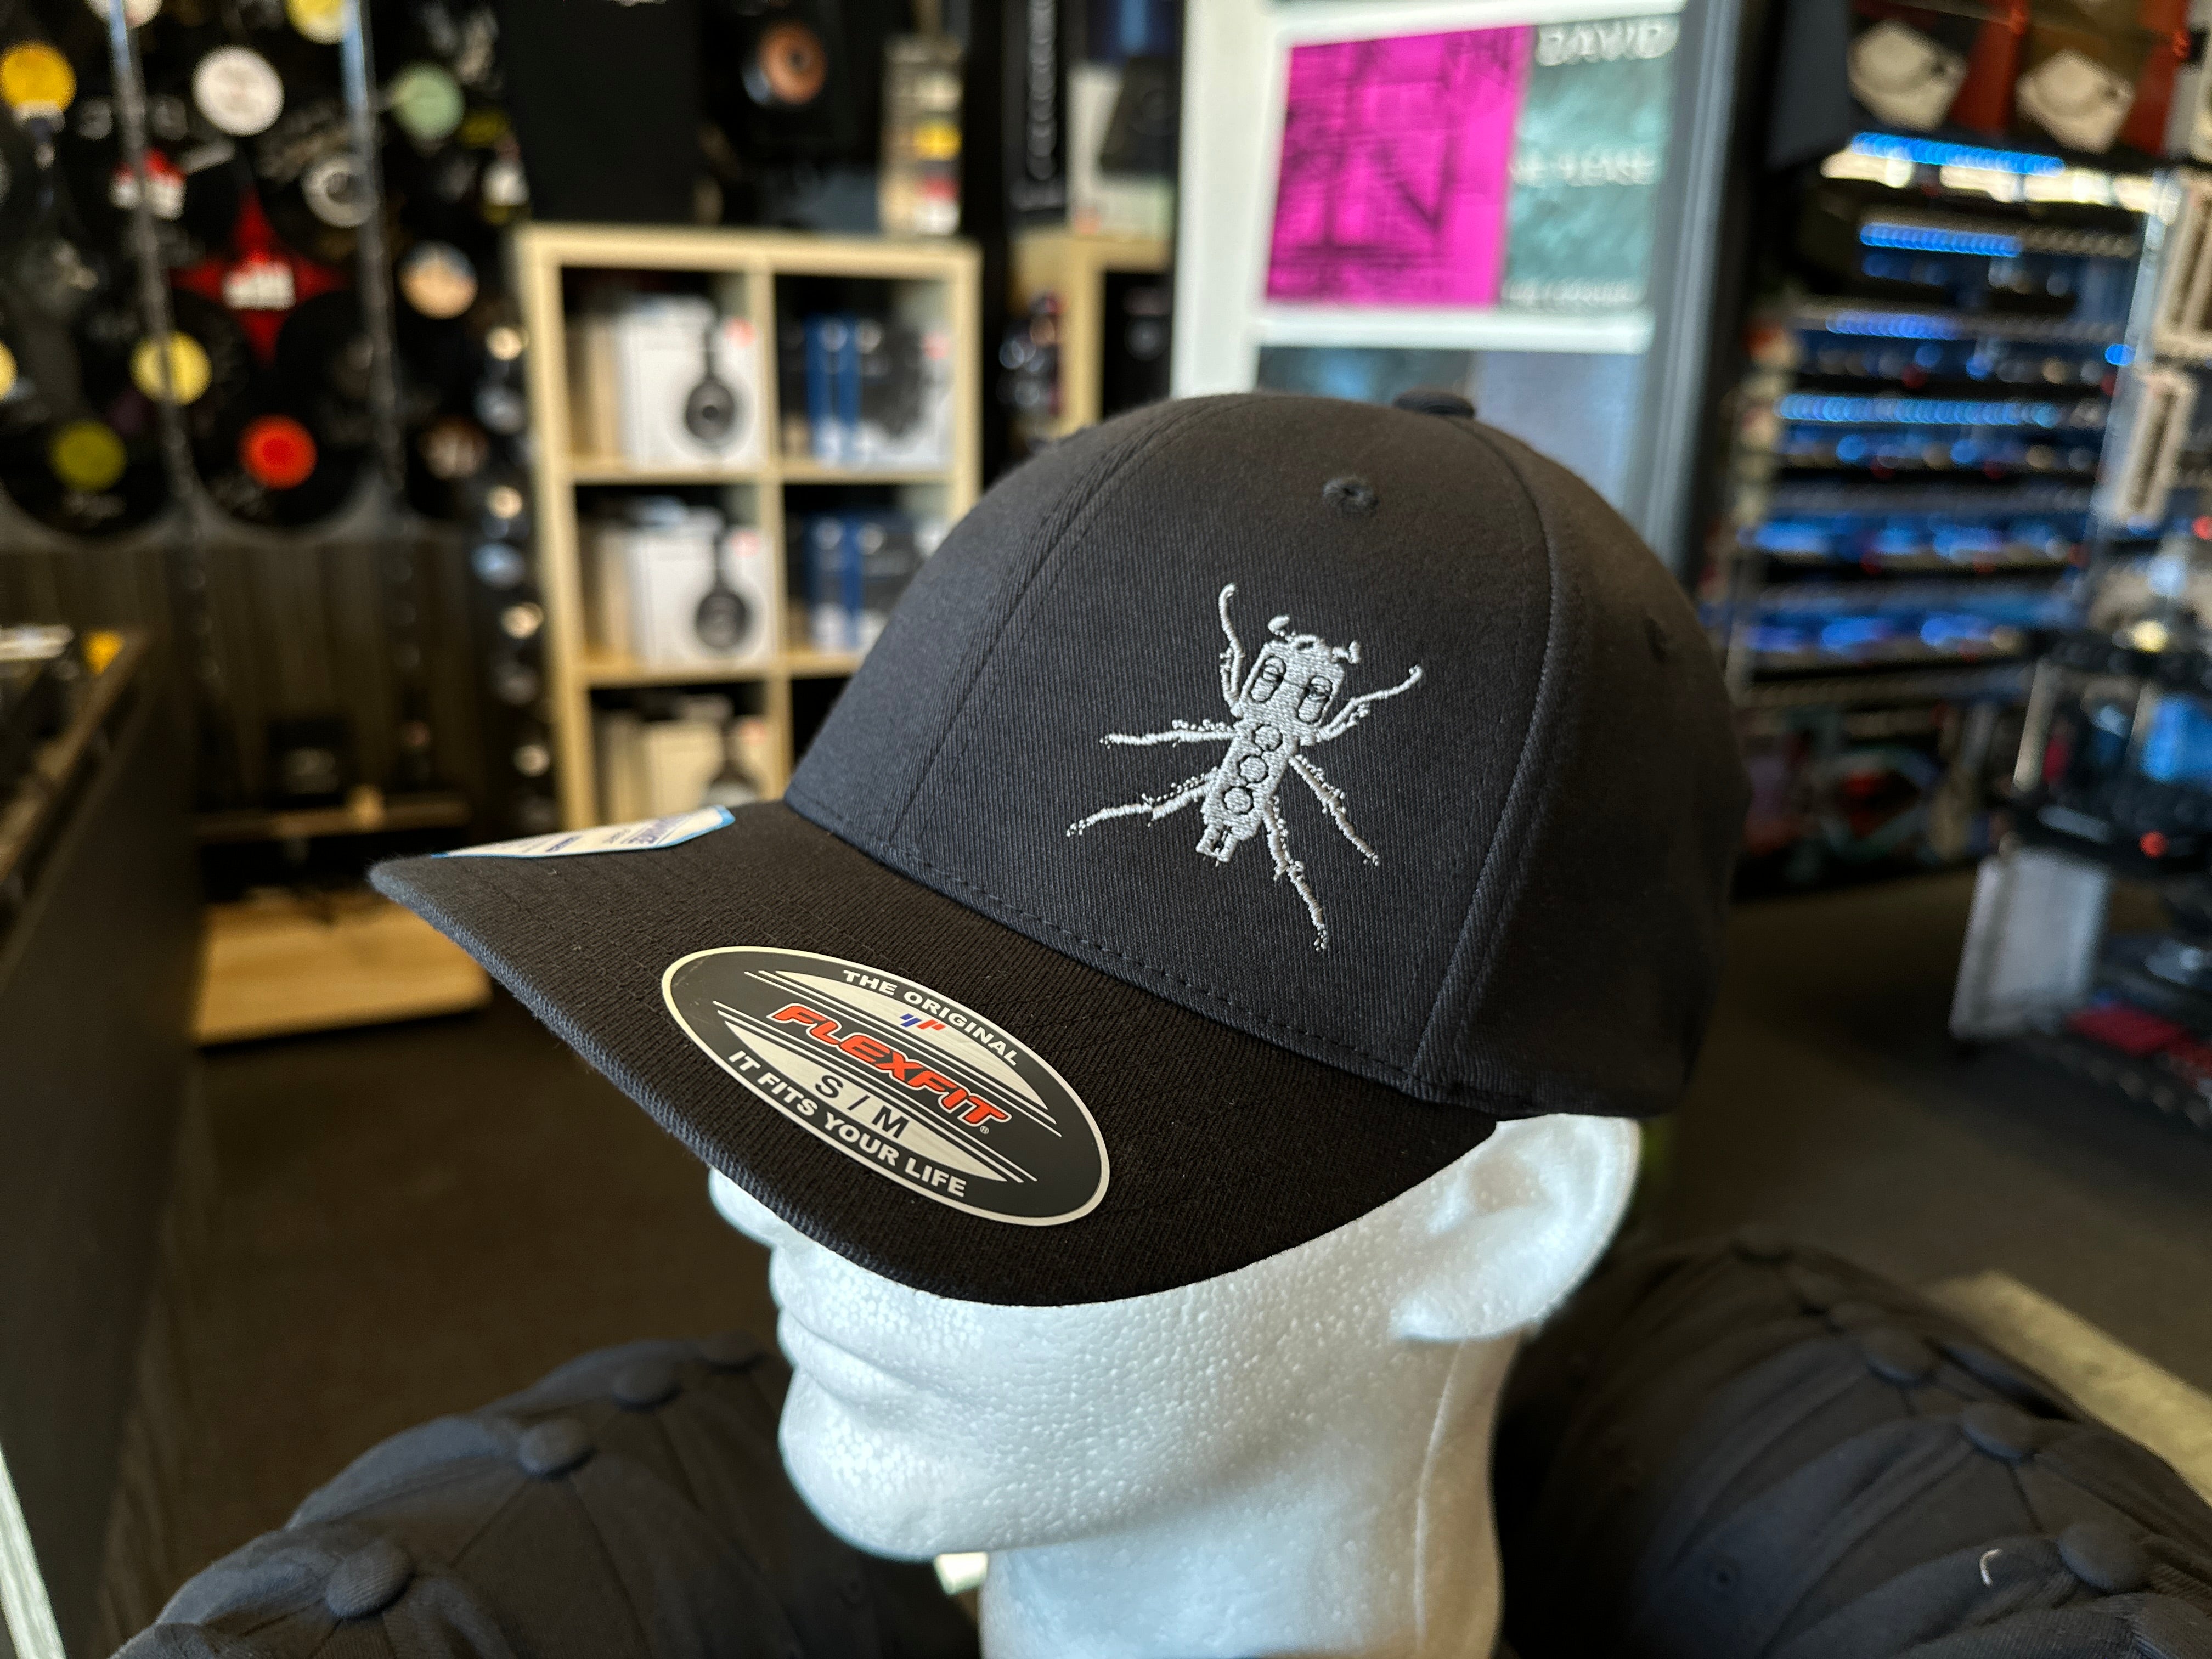 ThudRumble All Black Flexfit Hat with Grey Beedle Logo!